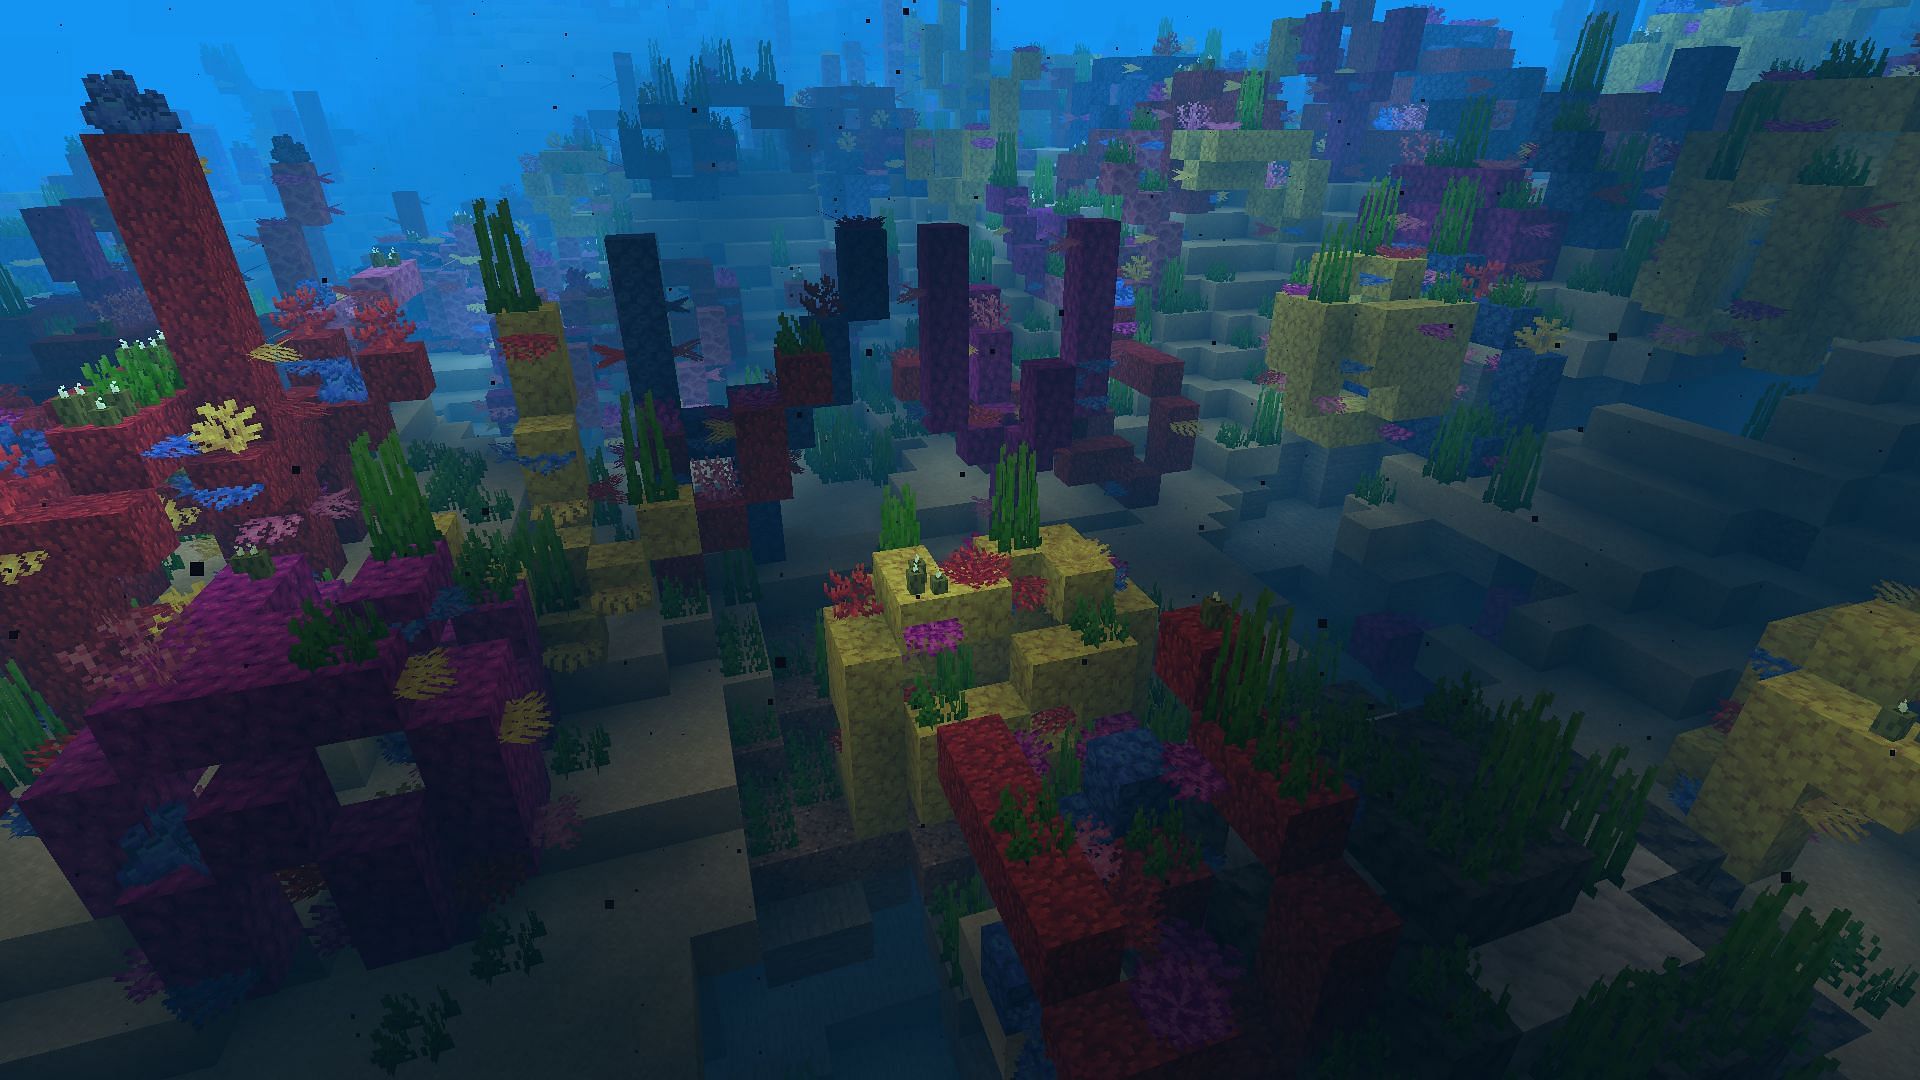 A coral reef found in warm oceans and populated with tropical fish (Image via Minecraft)